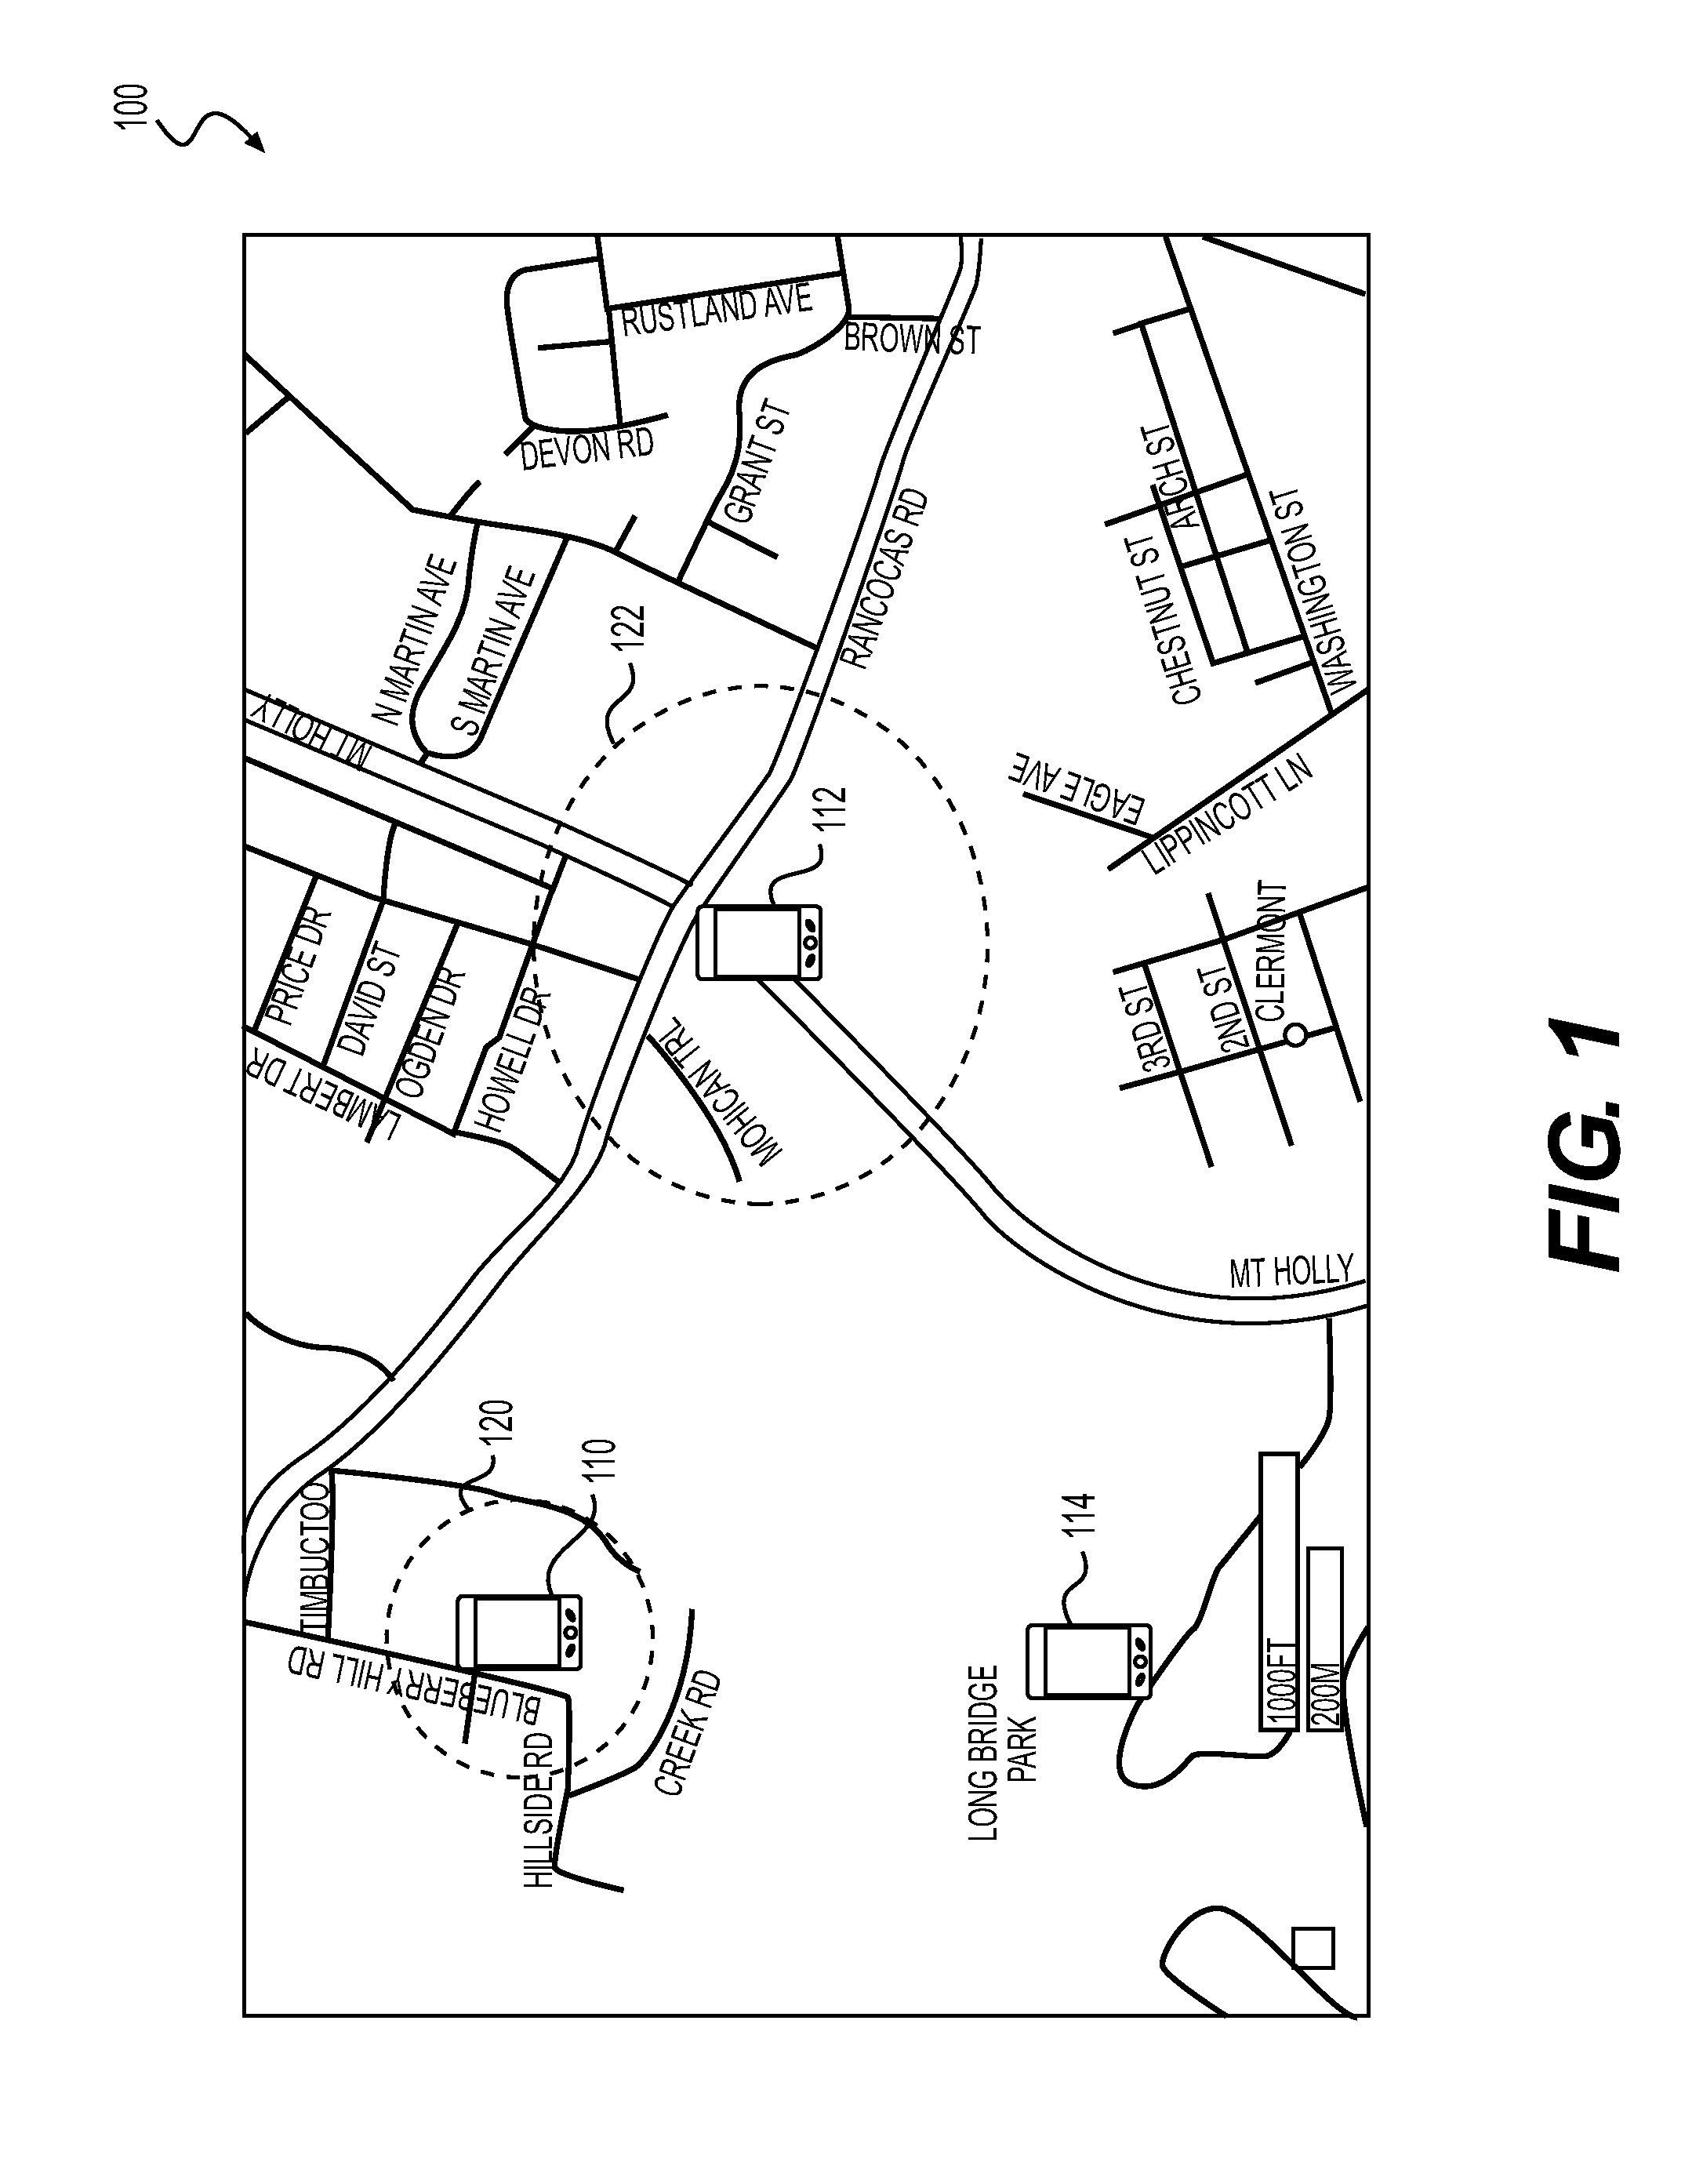 Systems and methods for geolocation-based authentication and authorization